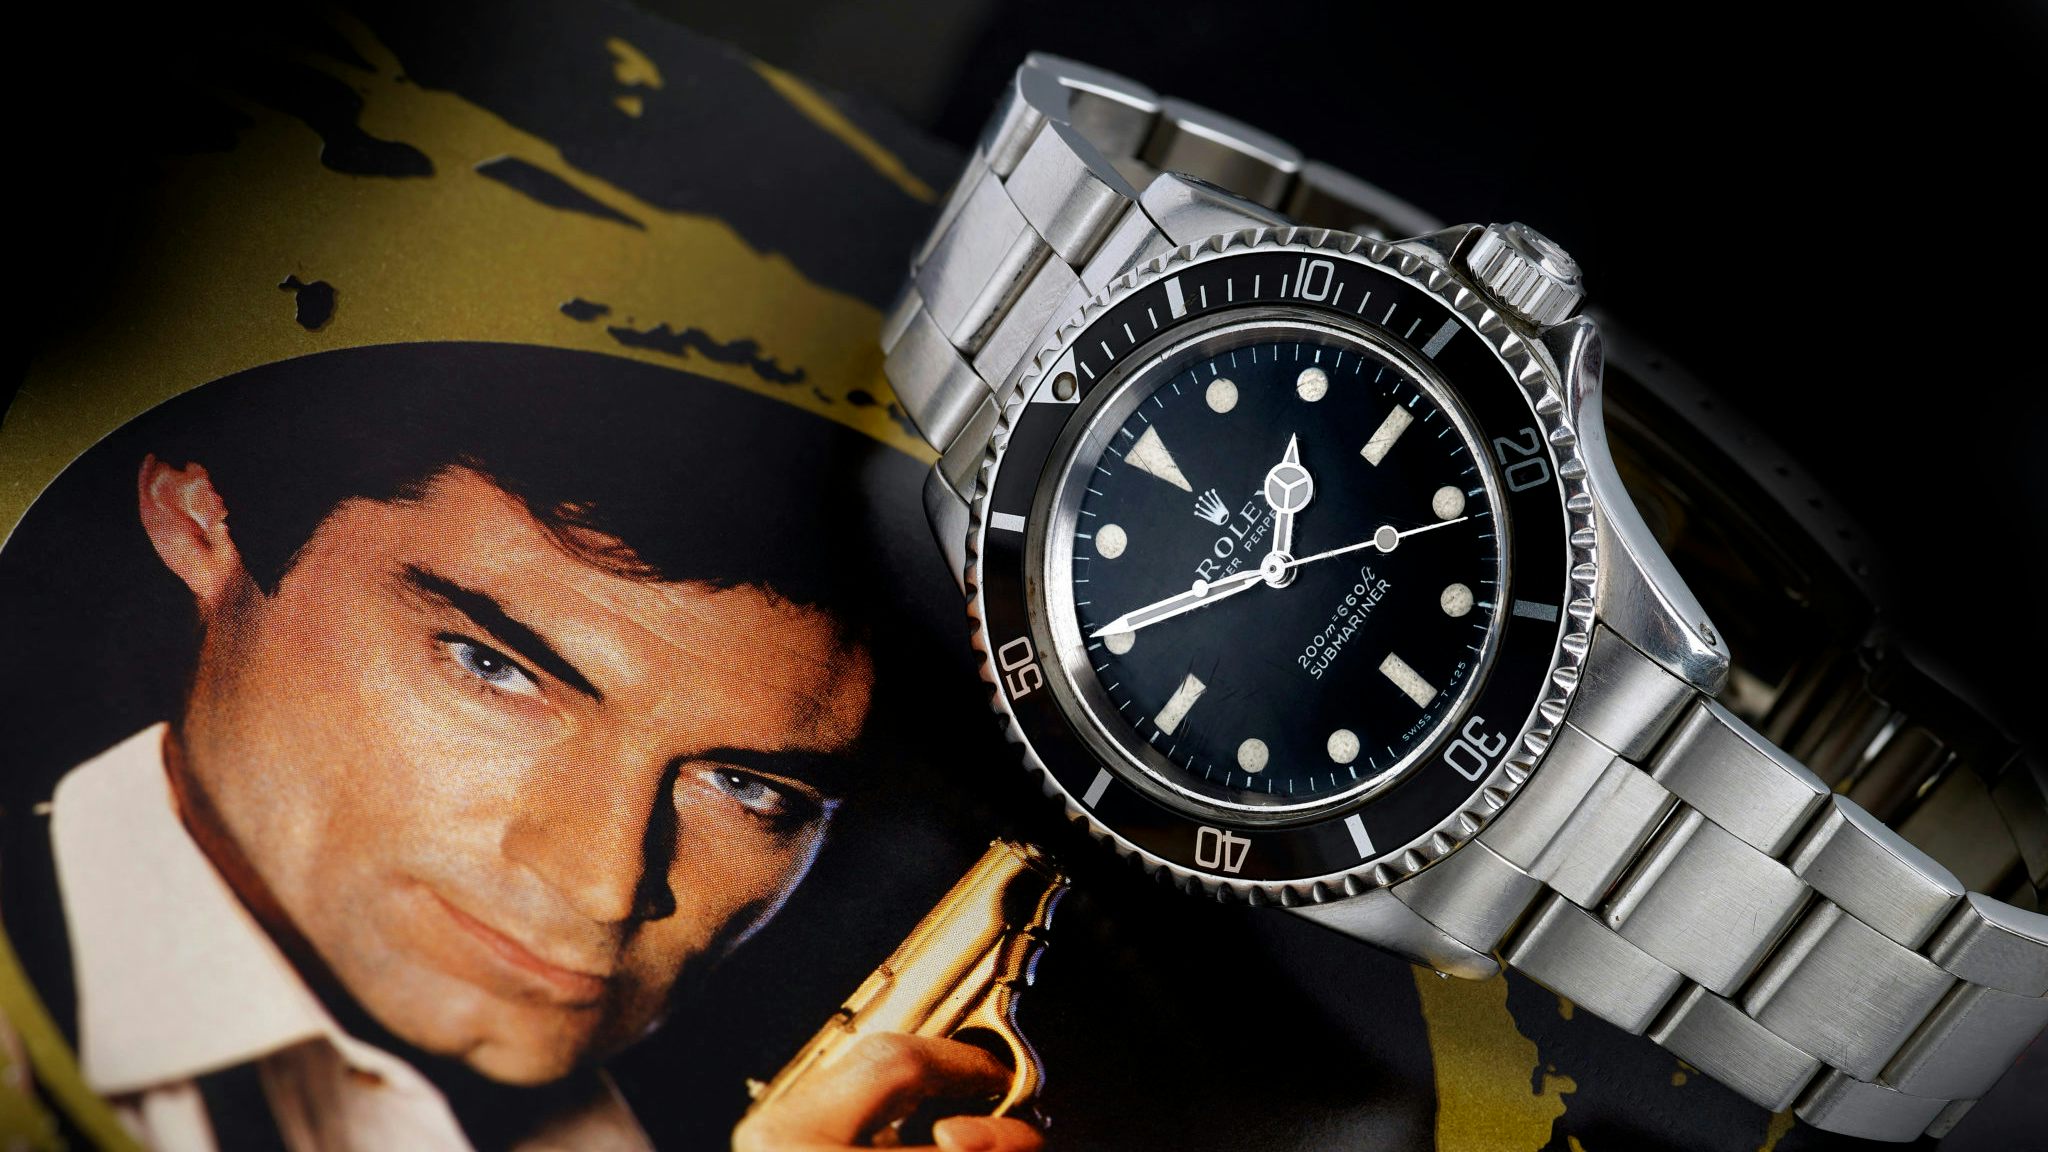 Rolex Submariner 16610 2001 - Buy from Timepiece trading ltd UK